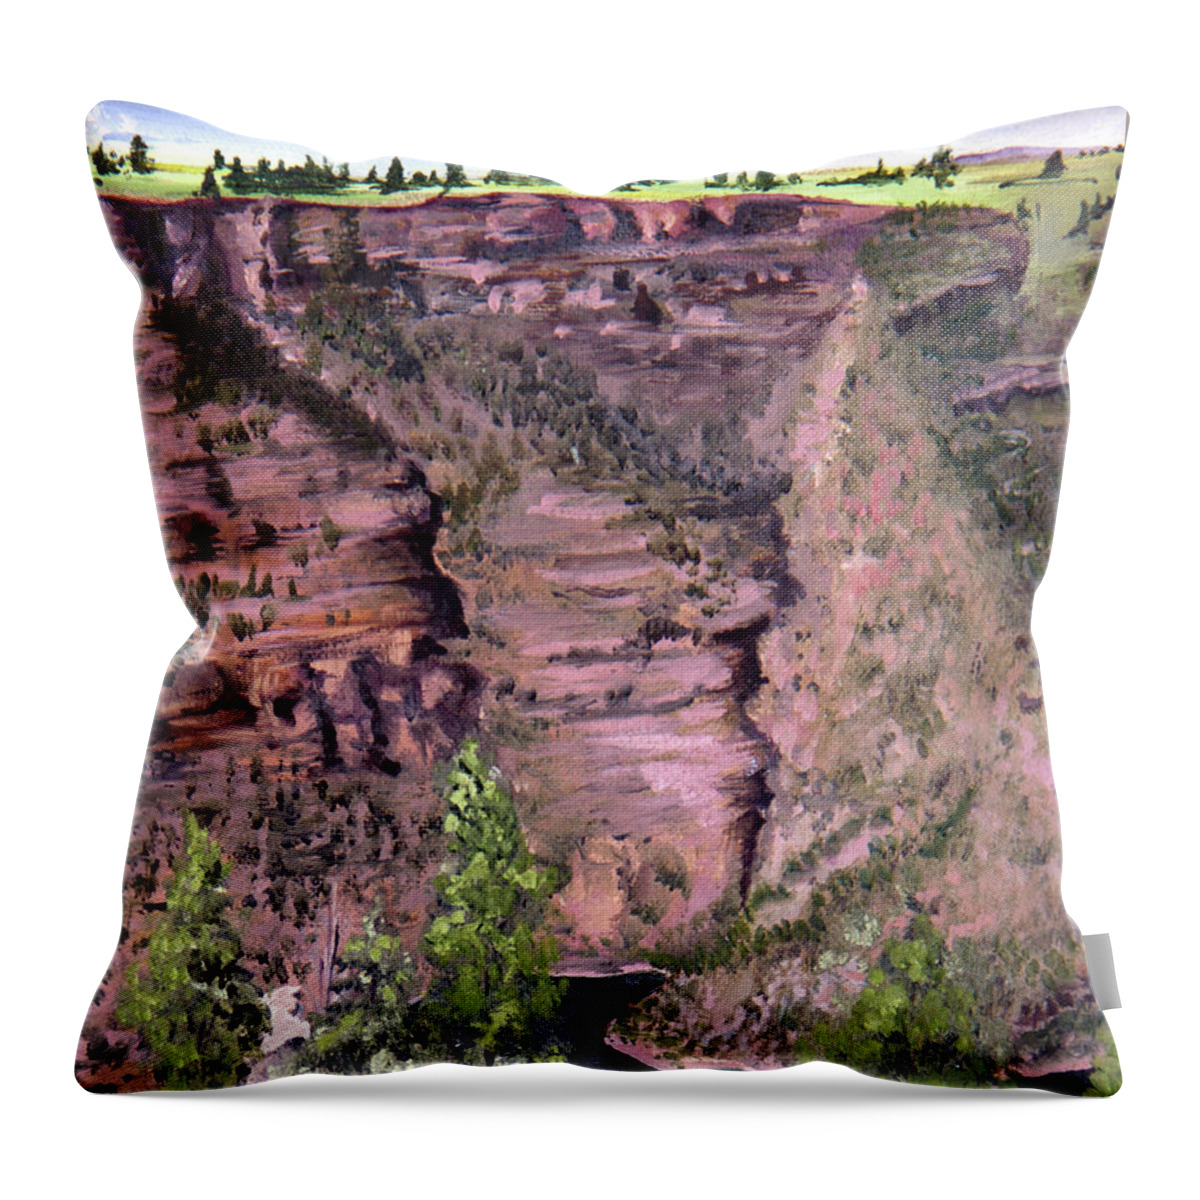 Flaming Gorge Throw Pillow featuring the painting Flaming Gorge by Nila Jane Autry